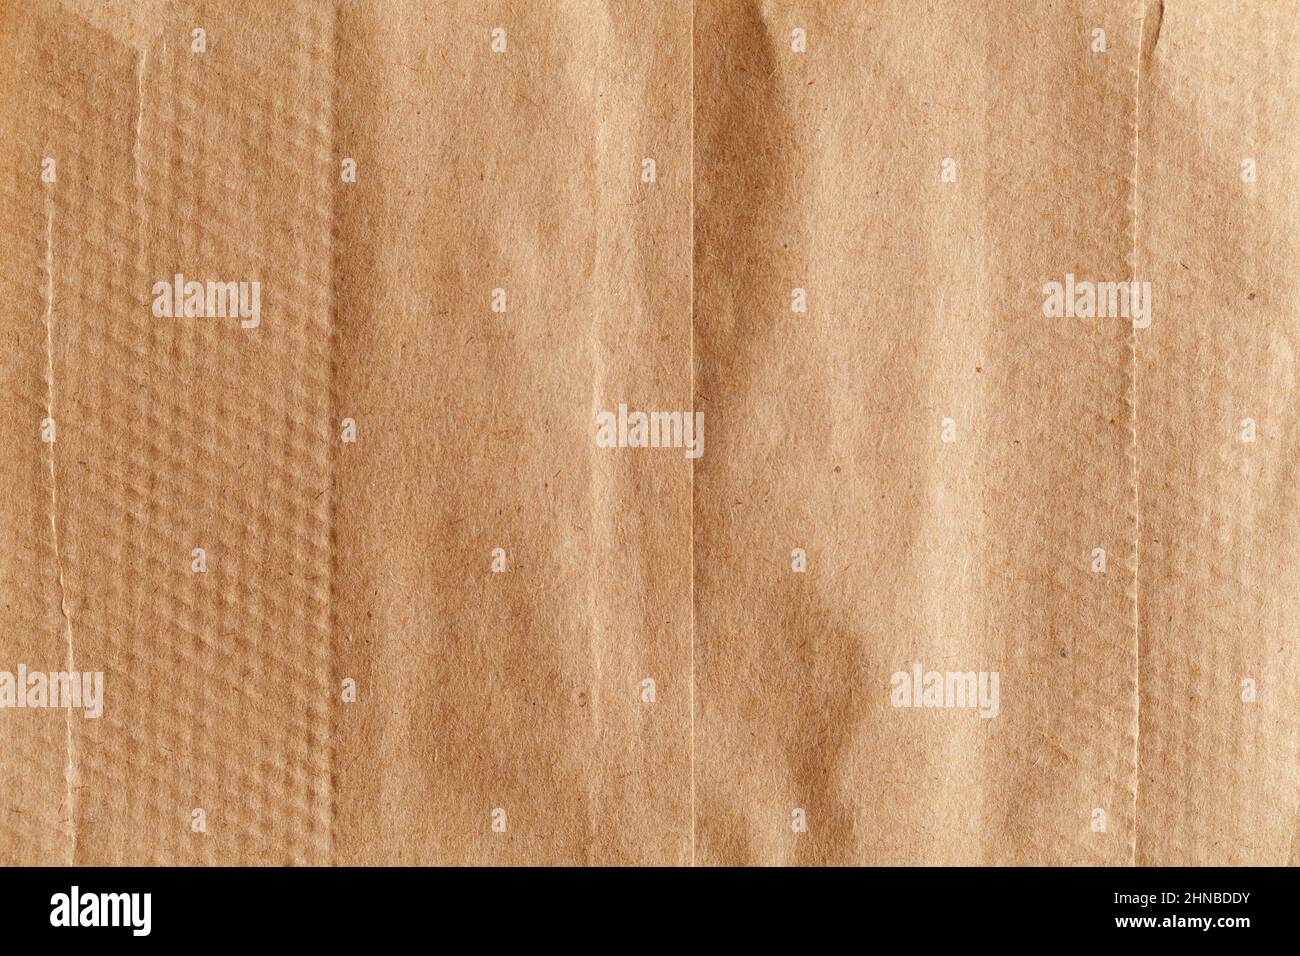 Flat Brown Paper Bag Wrinkled Texture  Background. Stock Photo